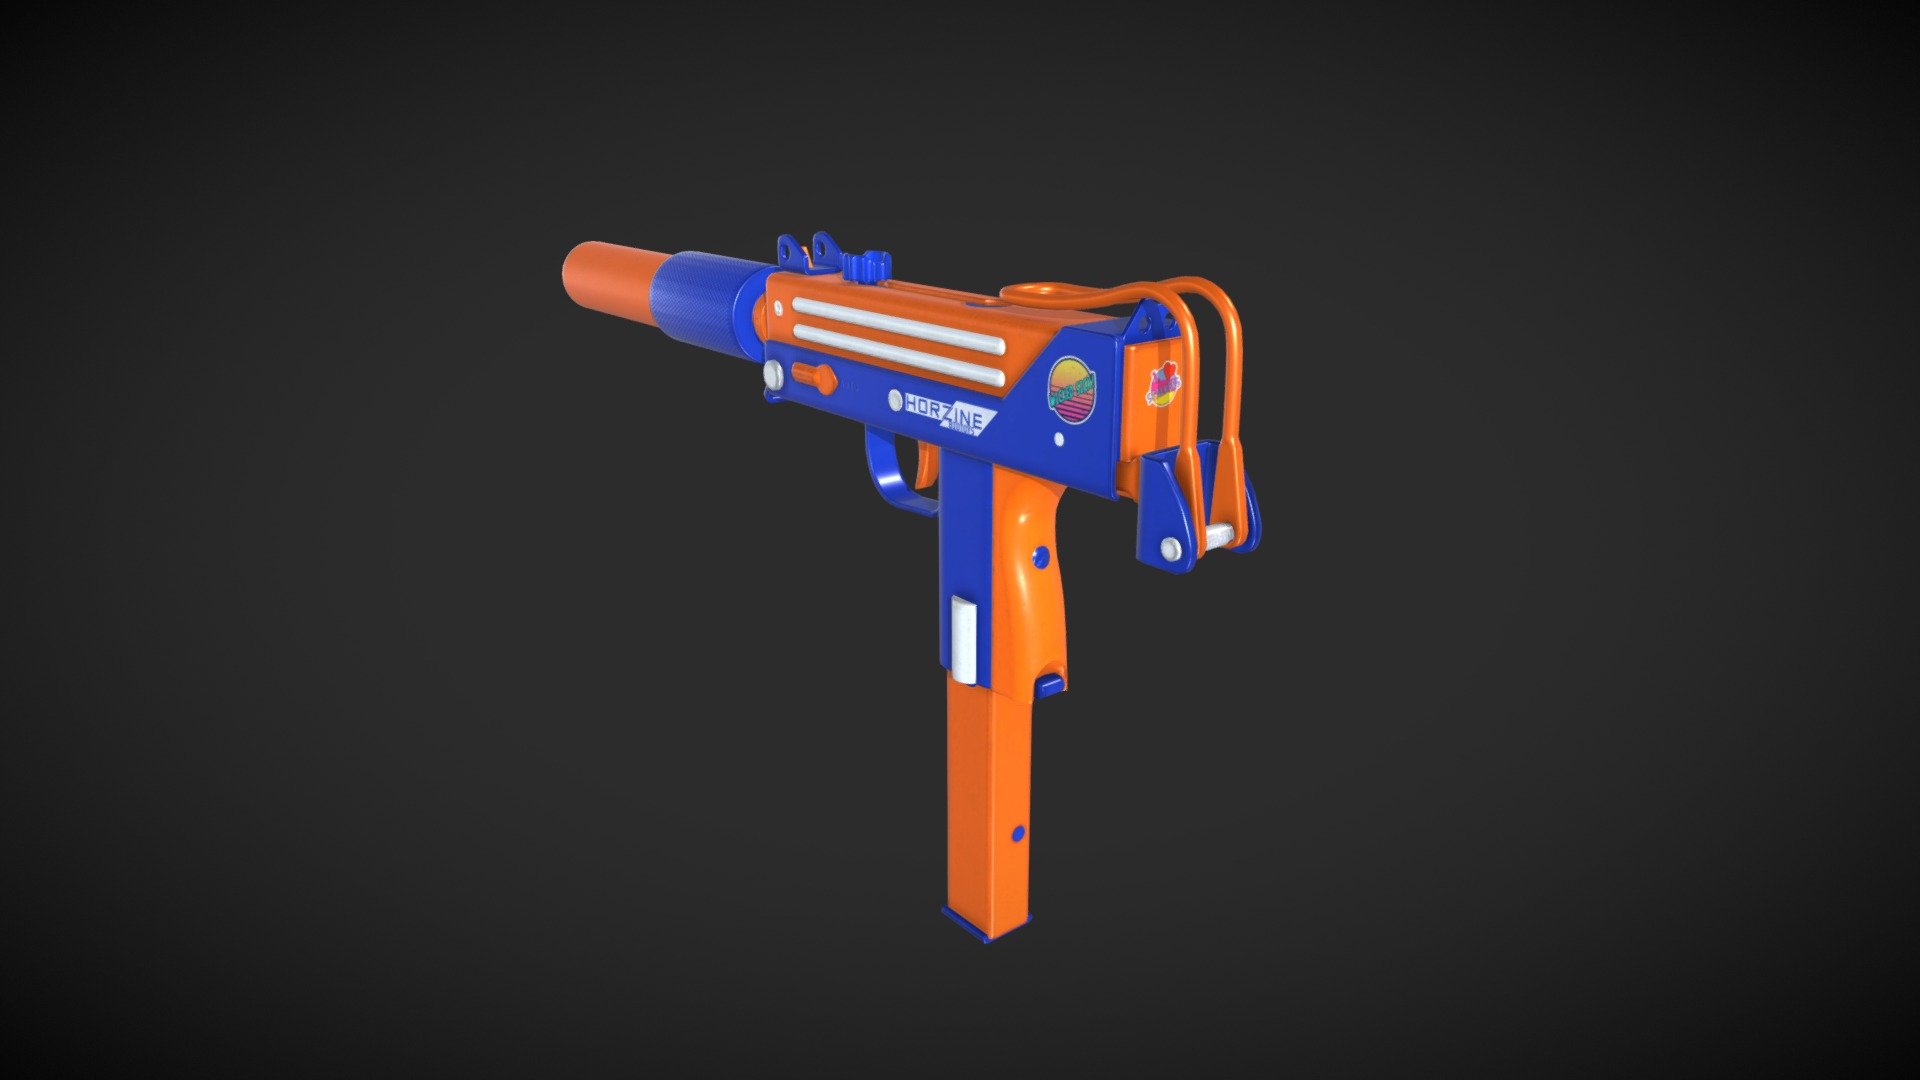 A workshop submission for Killing Floor 2

Model by Tripwire, Texture by me

http://steamcommunity.com/sharedfiles/filedetails/?id=1344027916 - Z-Strike Mac10 - 3D model by MrDoxies 3d model